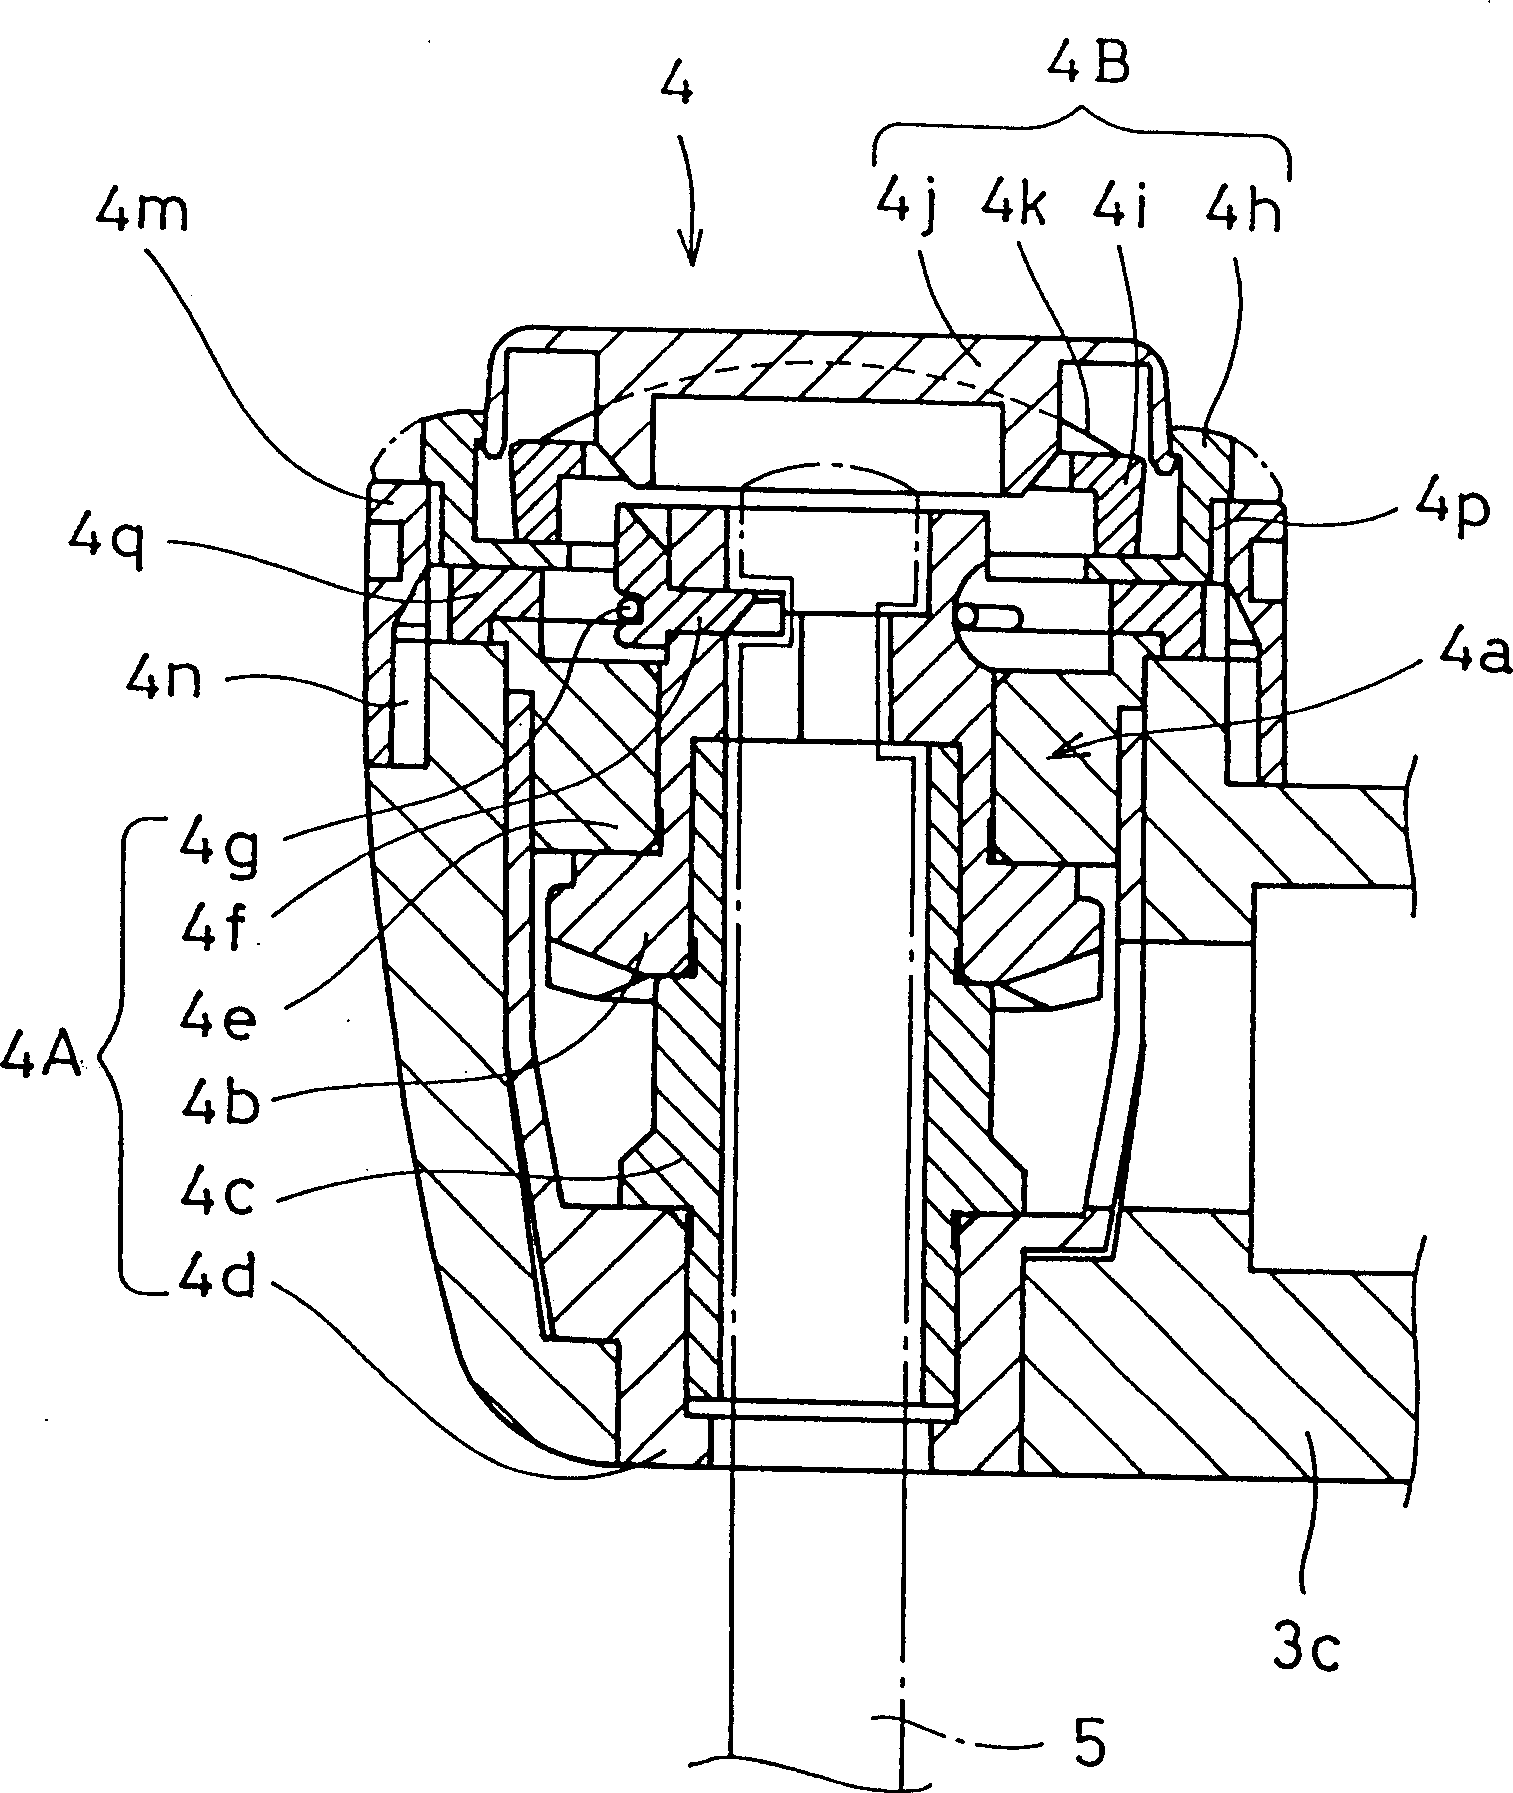 Headpiece having root canal length measurement function